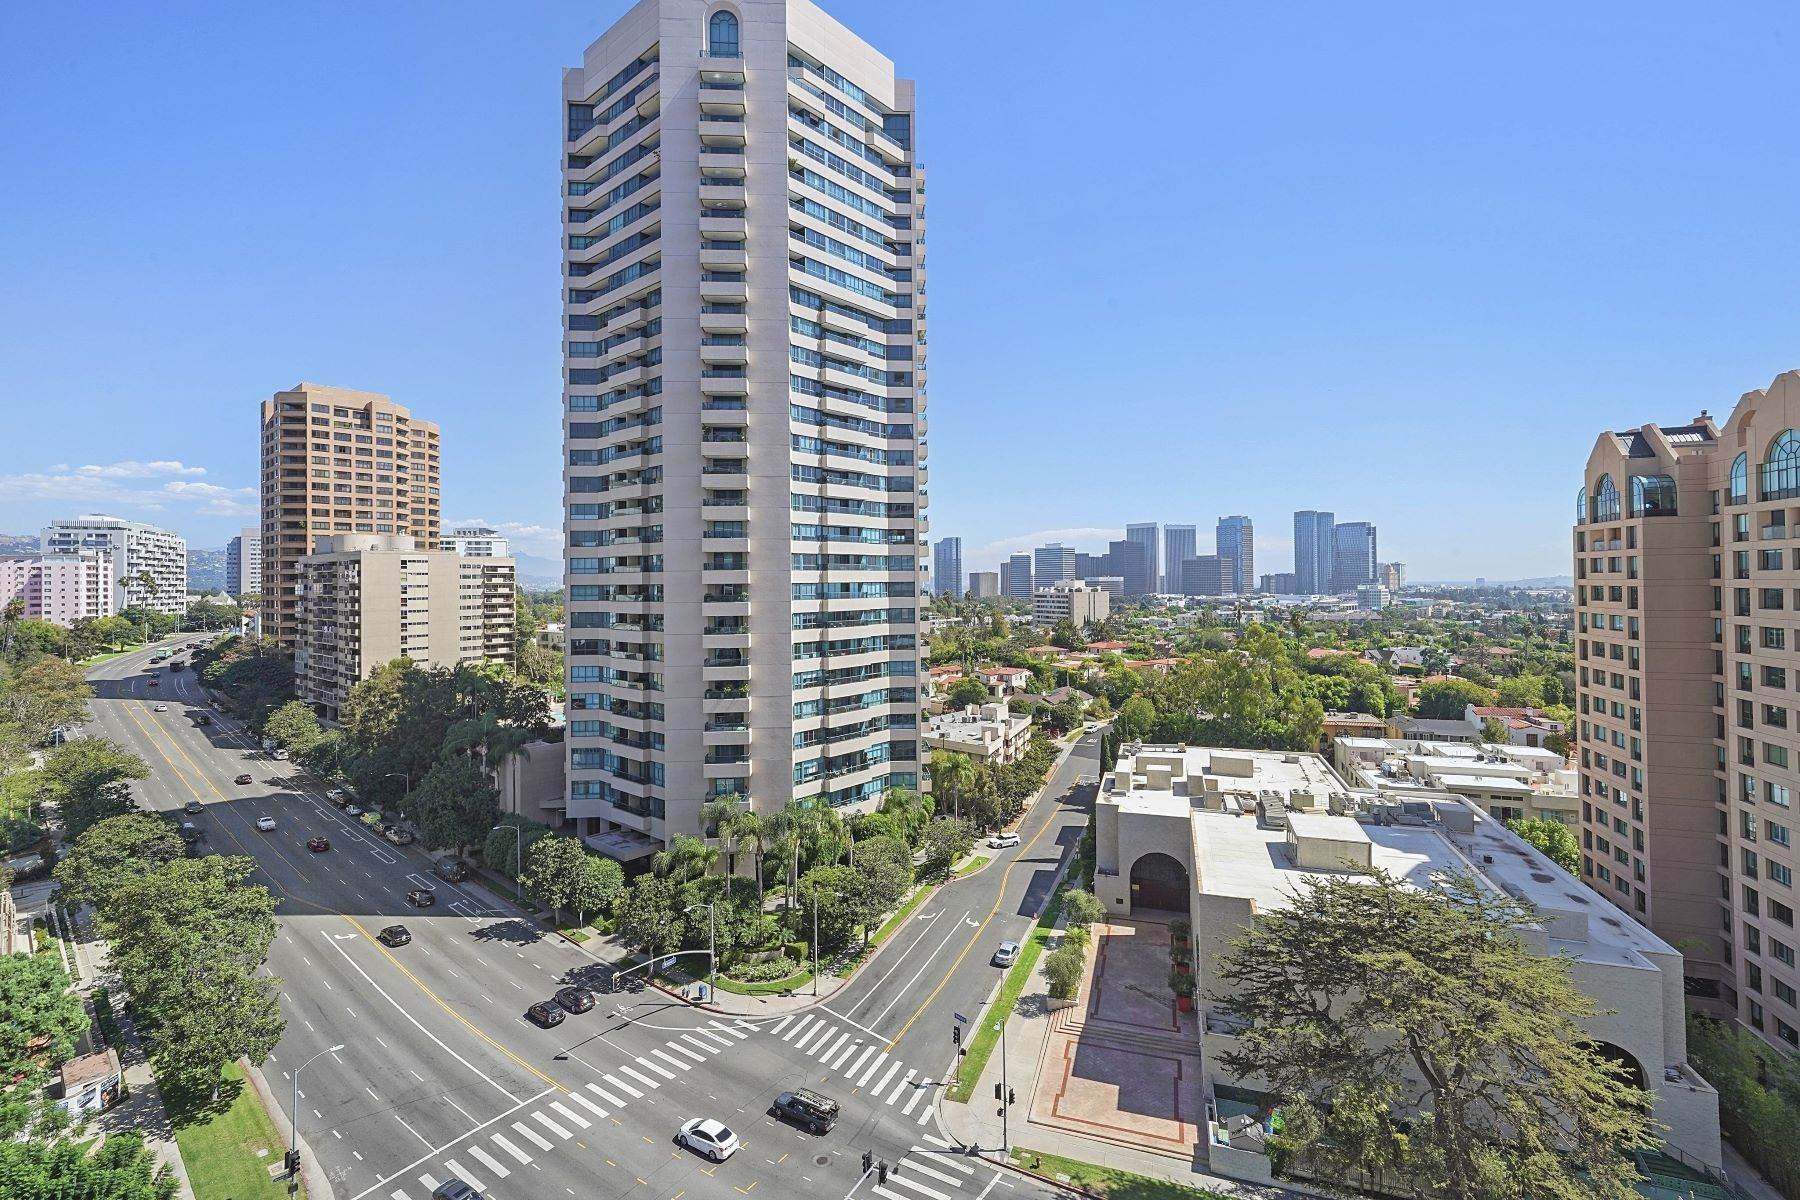 Condominiums for Sale at 10501 Wilshire Boulevard, Unit 1406 10501 Wilshire Boulevard, 1406 Los Angeles, California 90024 United States